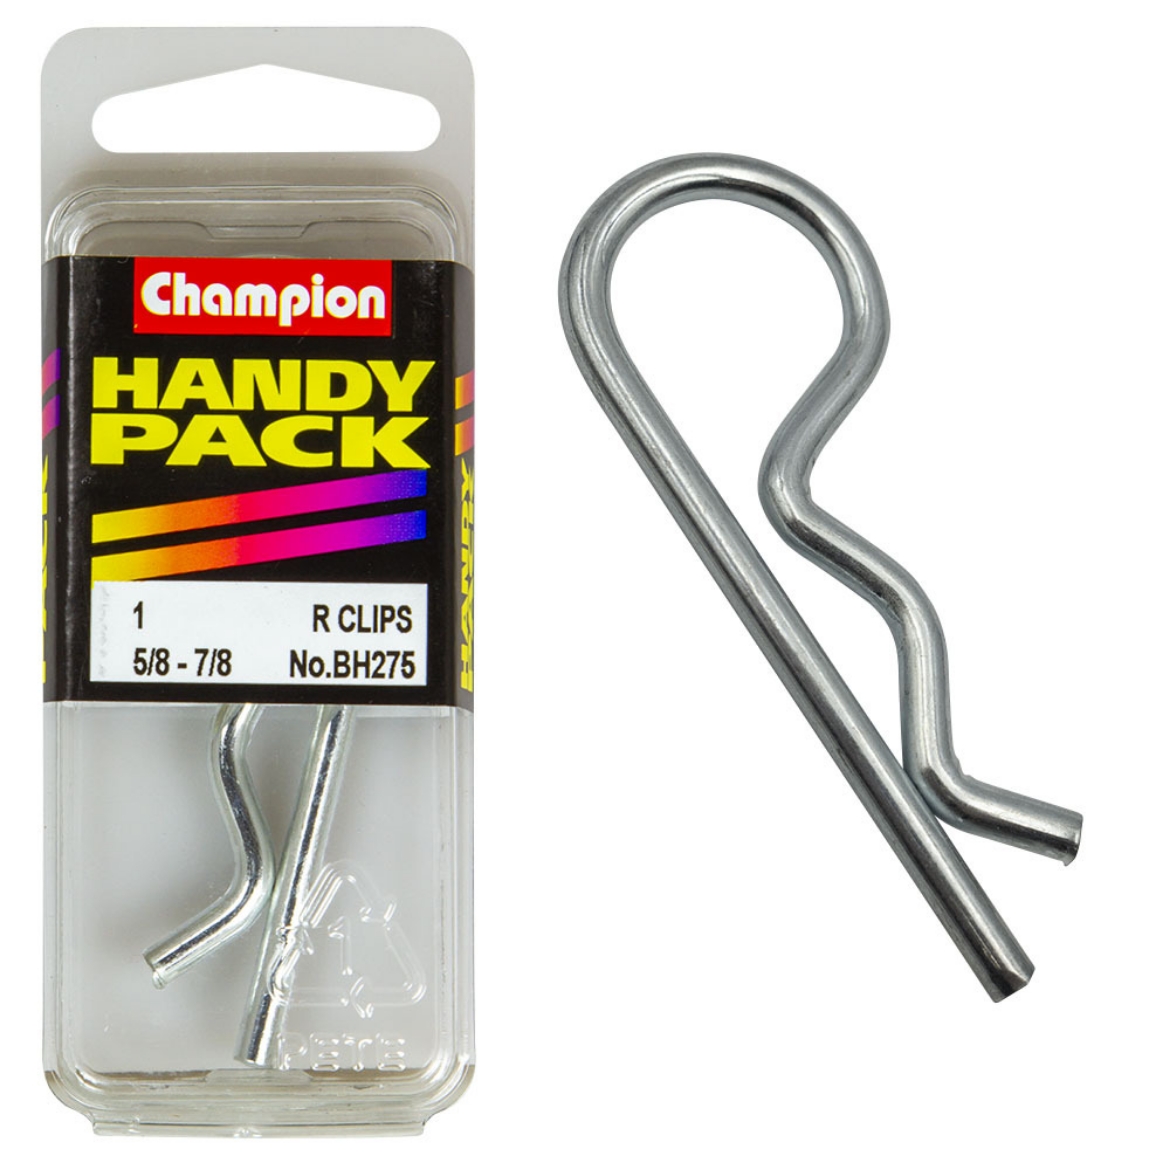 Picture of Handy Pk 'R' Clips 5/8 - 7/8 shaft RCL (Pkt.1)